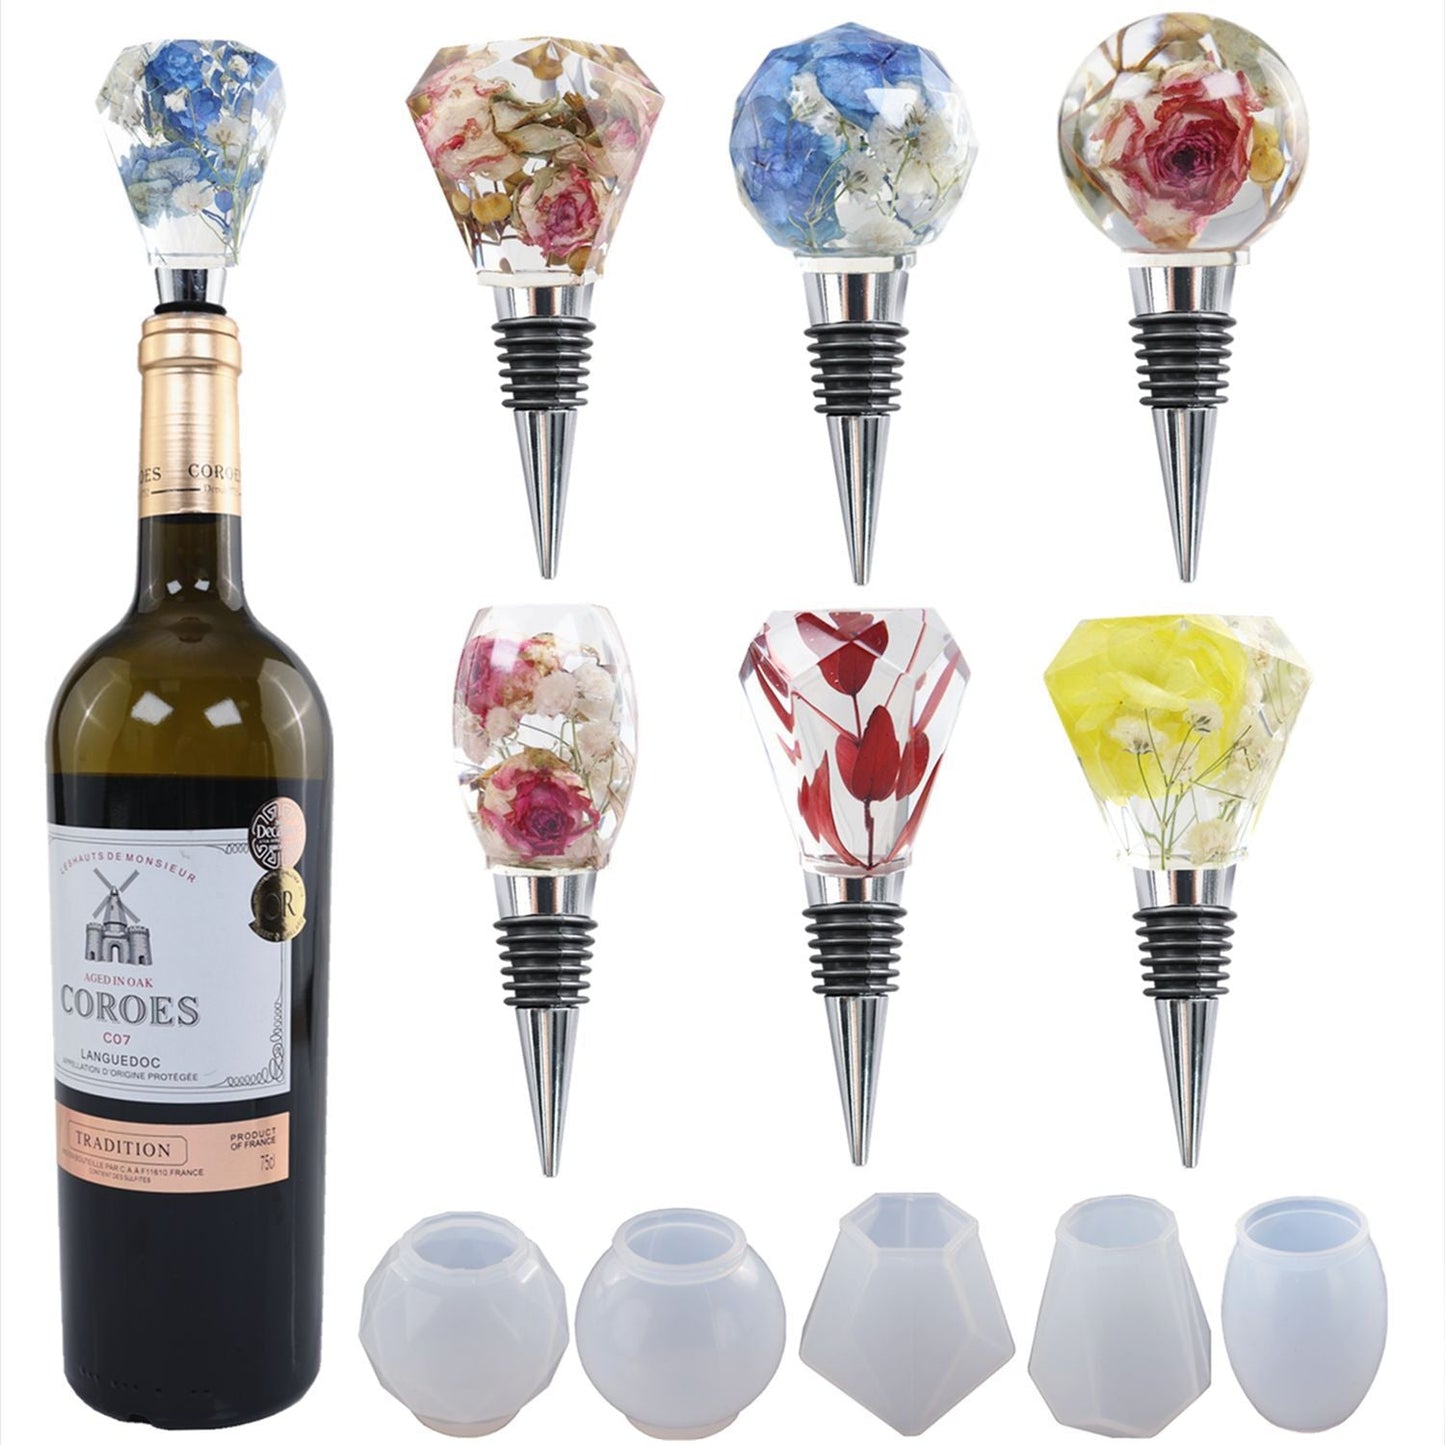 Epoxy Resin Wine Stopper Silicone Mould Set Moulds